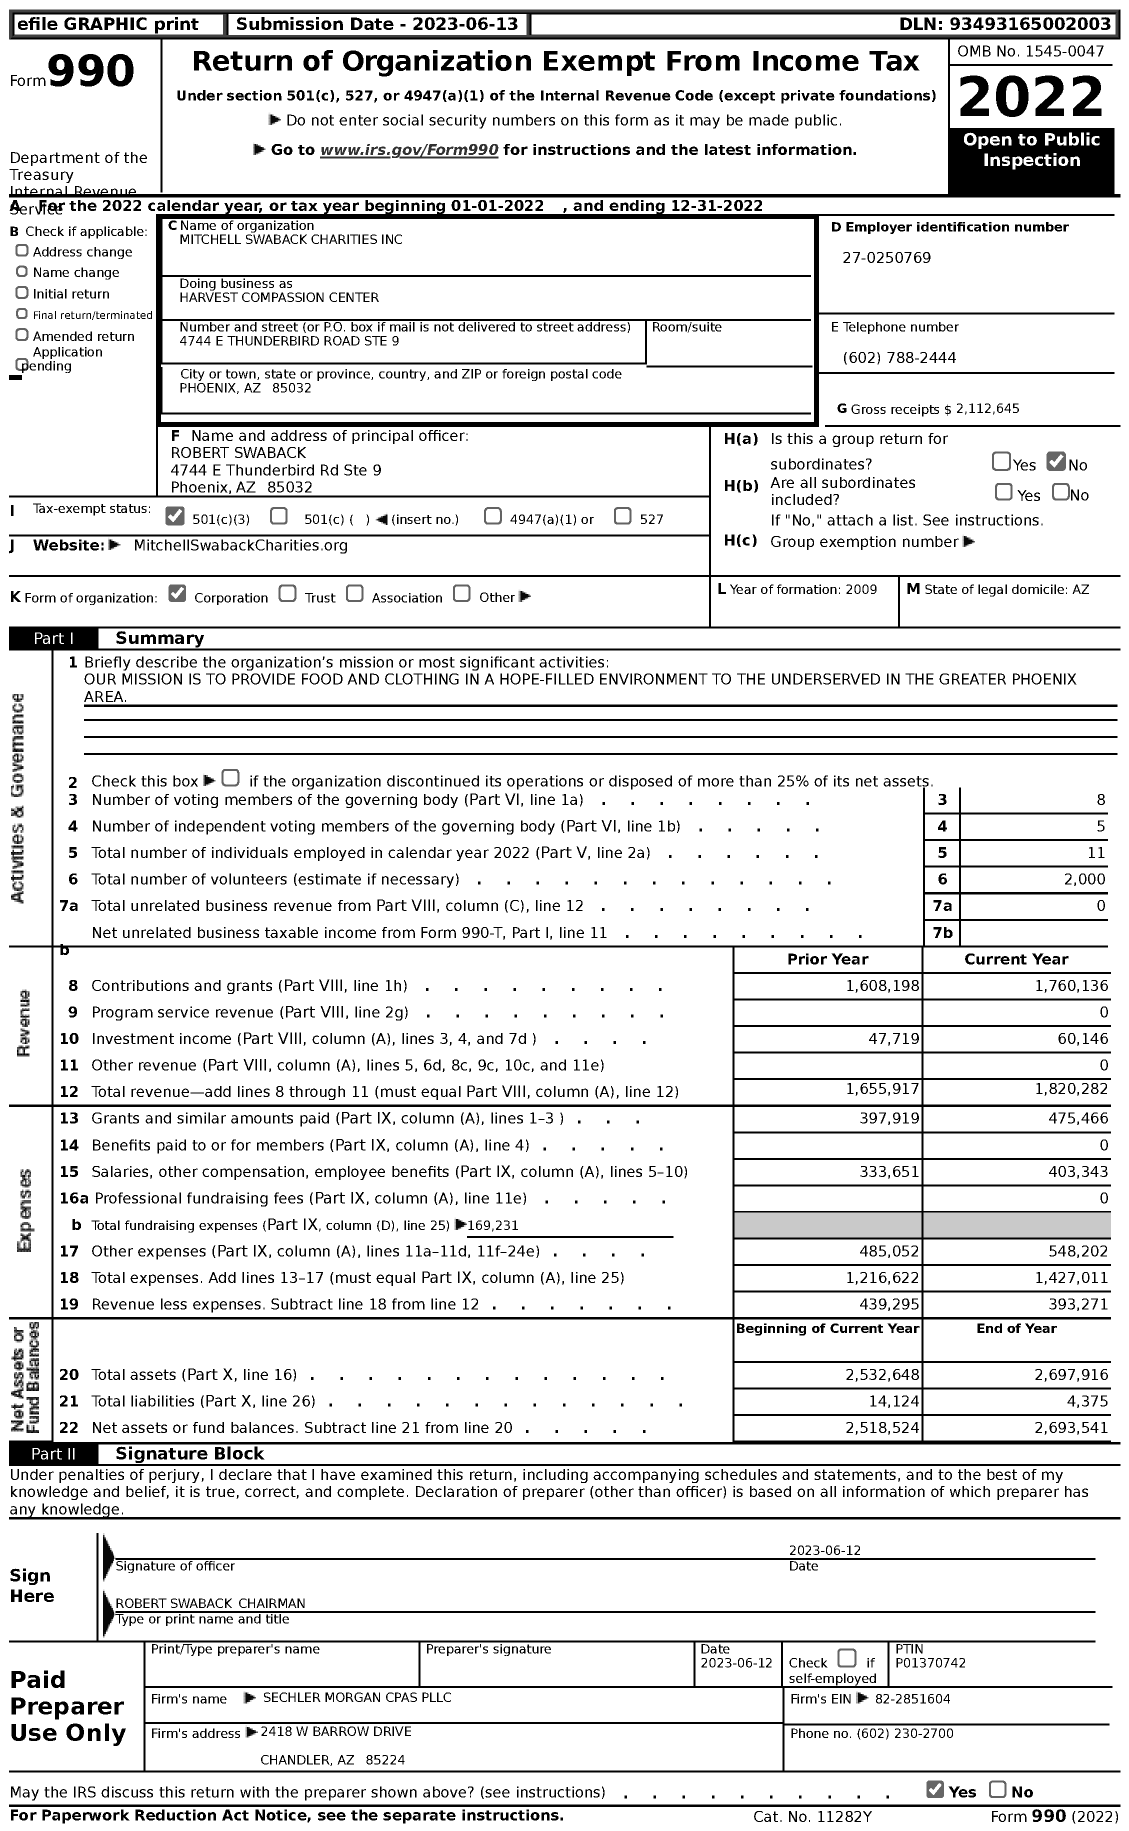 Image of first page of 2022 Form 990 for Harvest Compassion Center